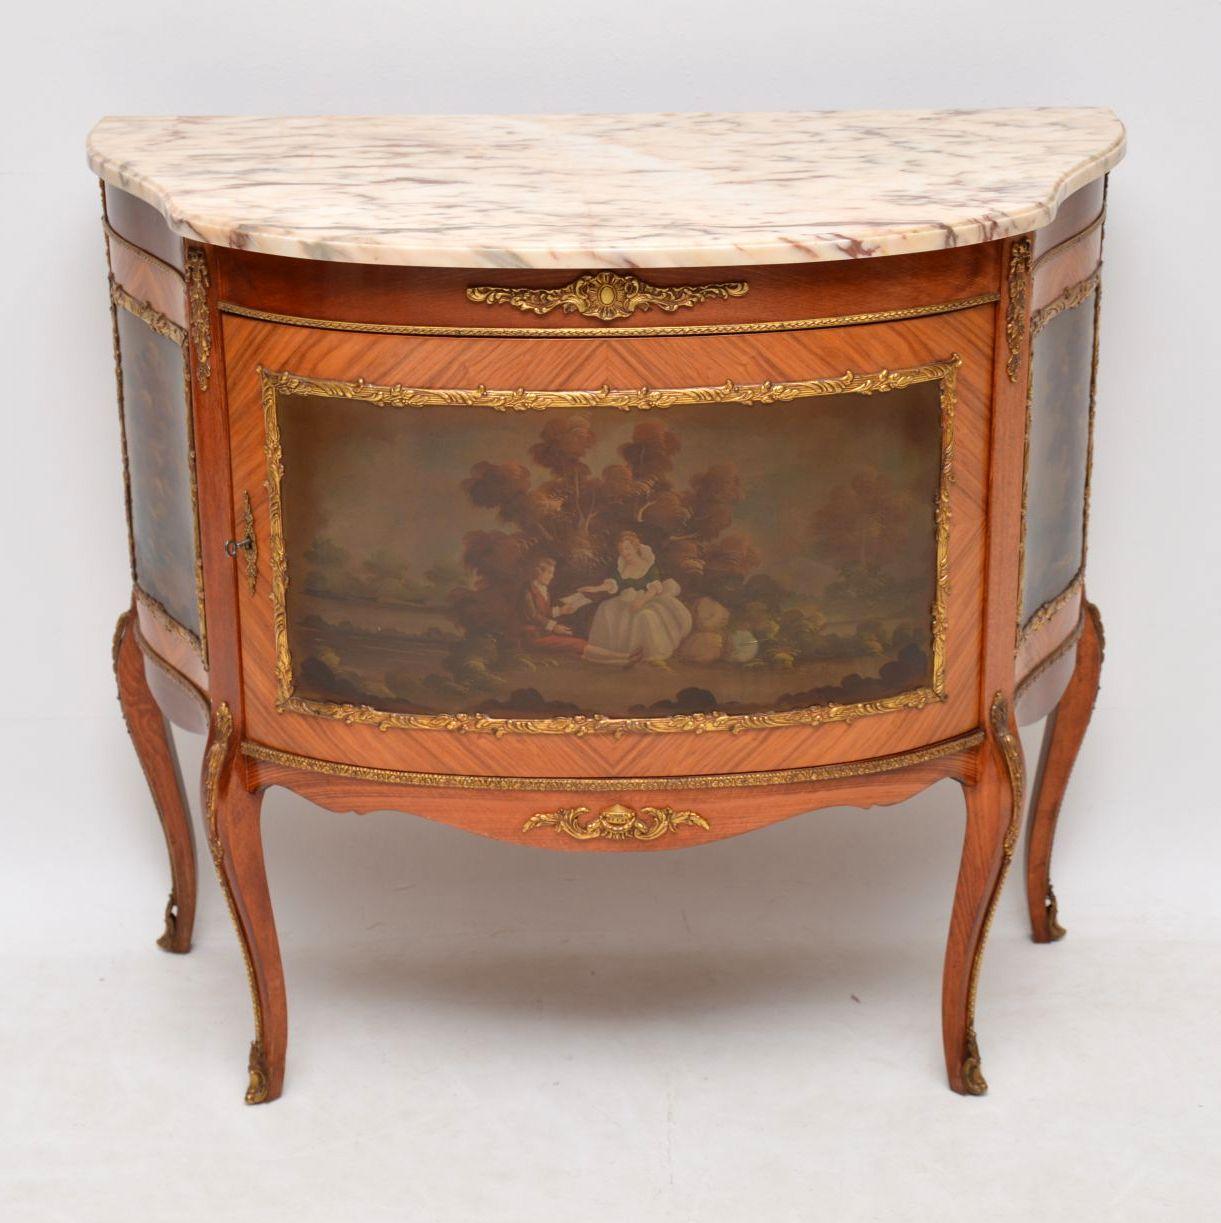 Antique French marble-top cabinet with gilt bronze mounts and decorative scenes in panels. It’s in very good condition and I would date circa 1930s period. The marble top is original and can be lifted off the cabinet separately. There is one